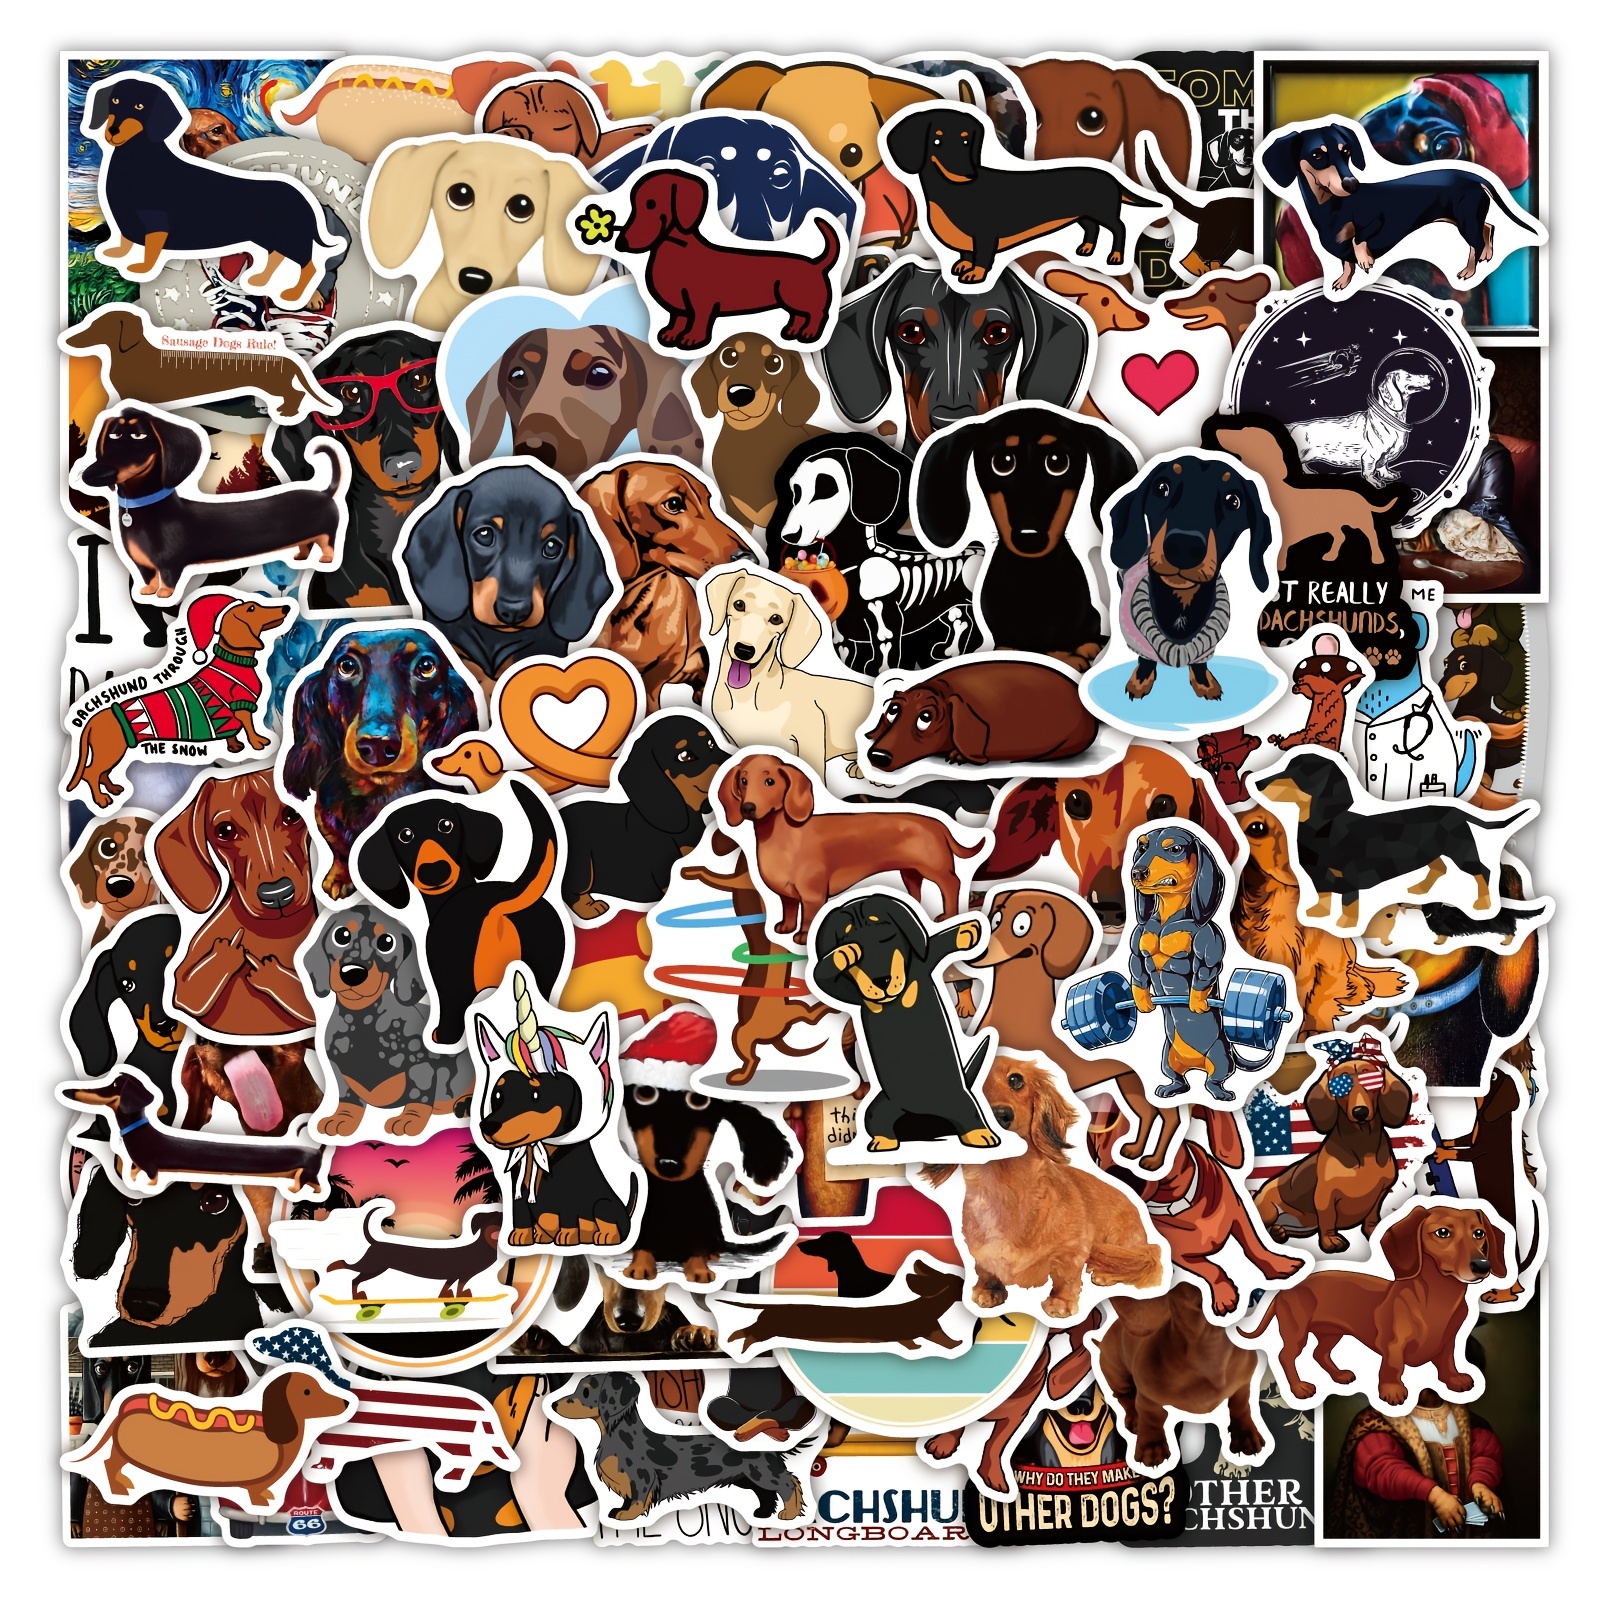 103 Adorable Dachshund Stickers - Perfect for Teens' Water Bottles, Planners, Skateboards & More!